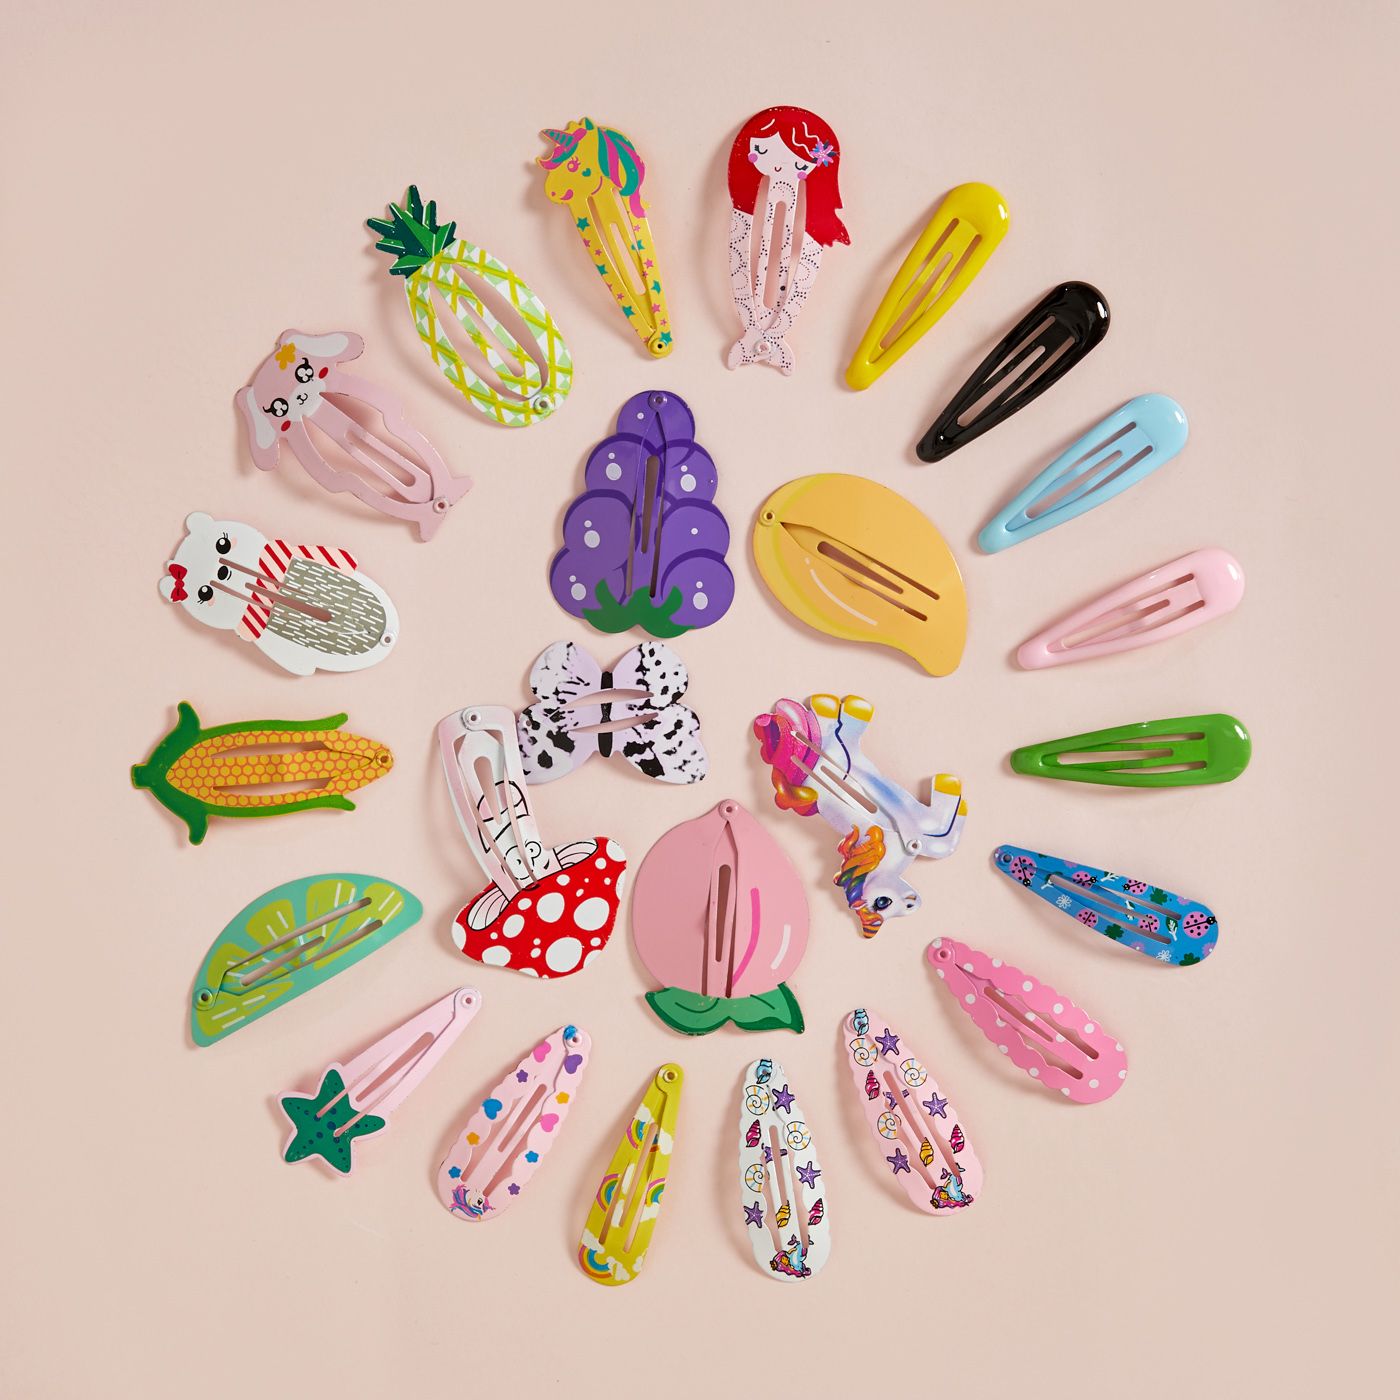 25-pcs Cute Candy Color Cartoon Design Hair Clips For Girls